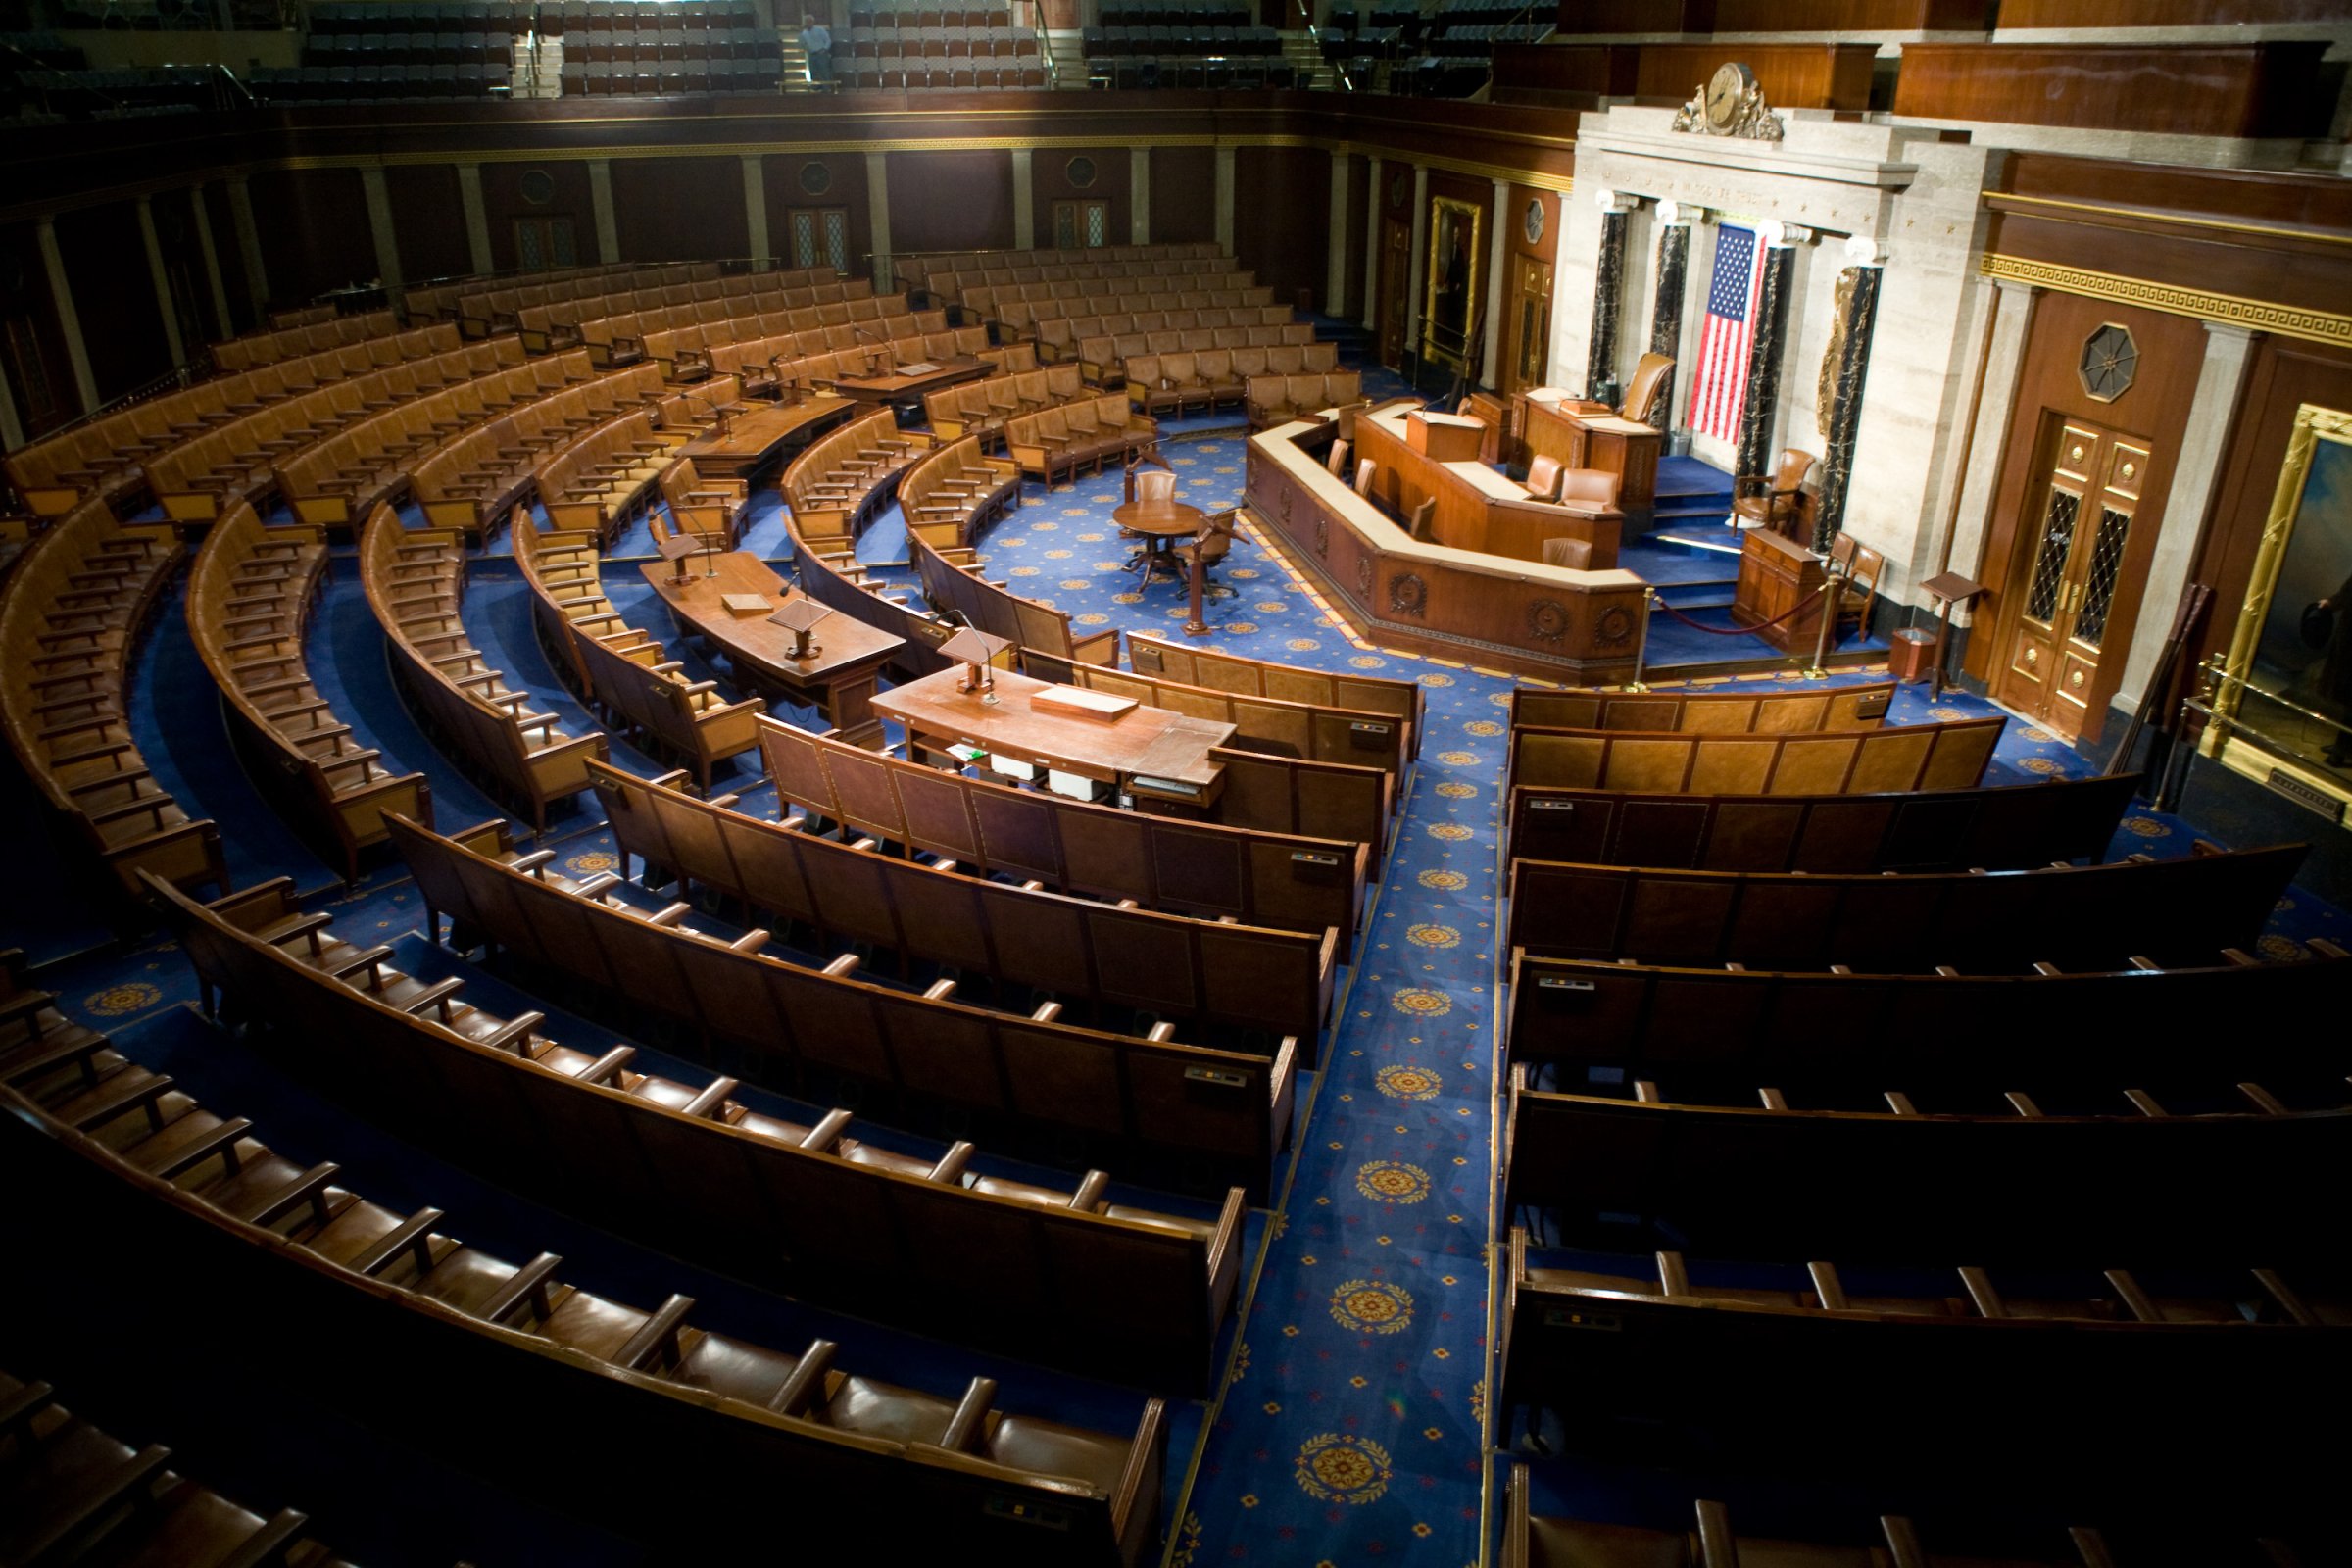 The U.S. House of Representatives chamber is seen December 8, 2008 in Washington.